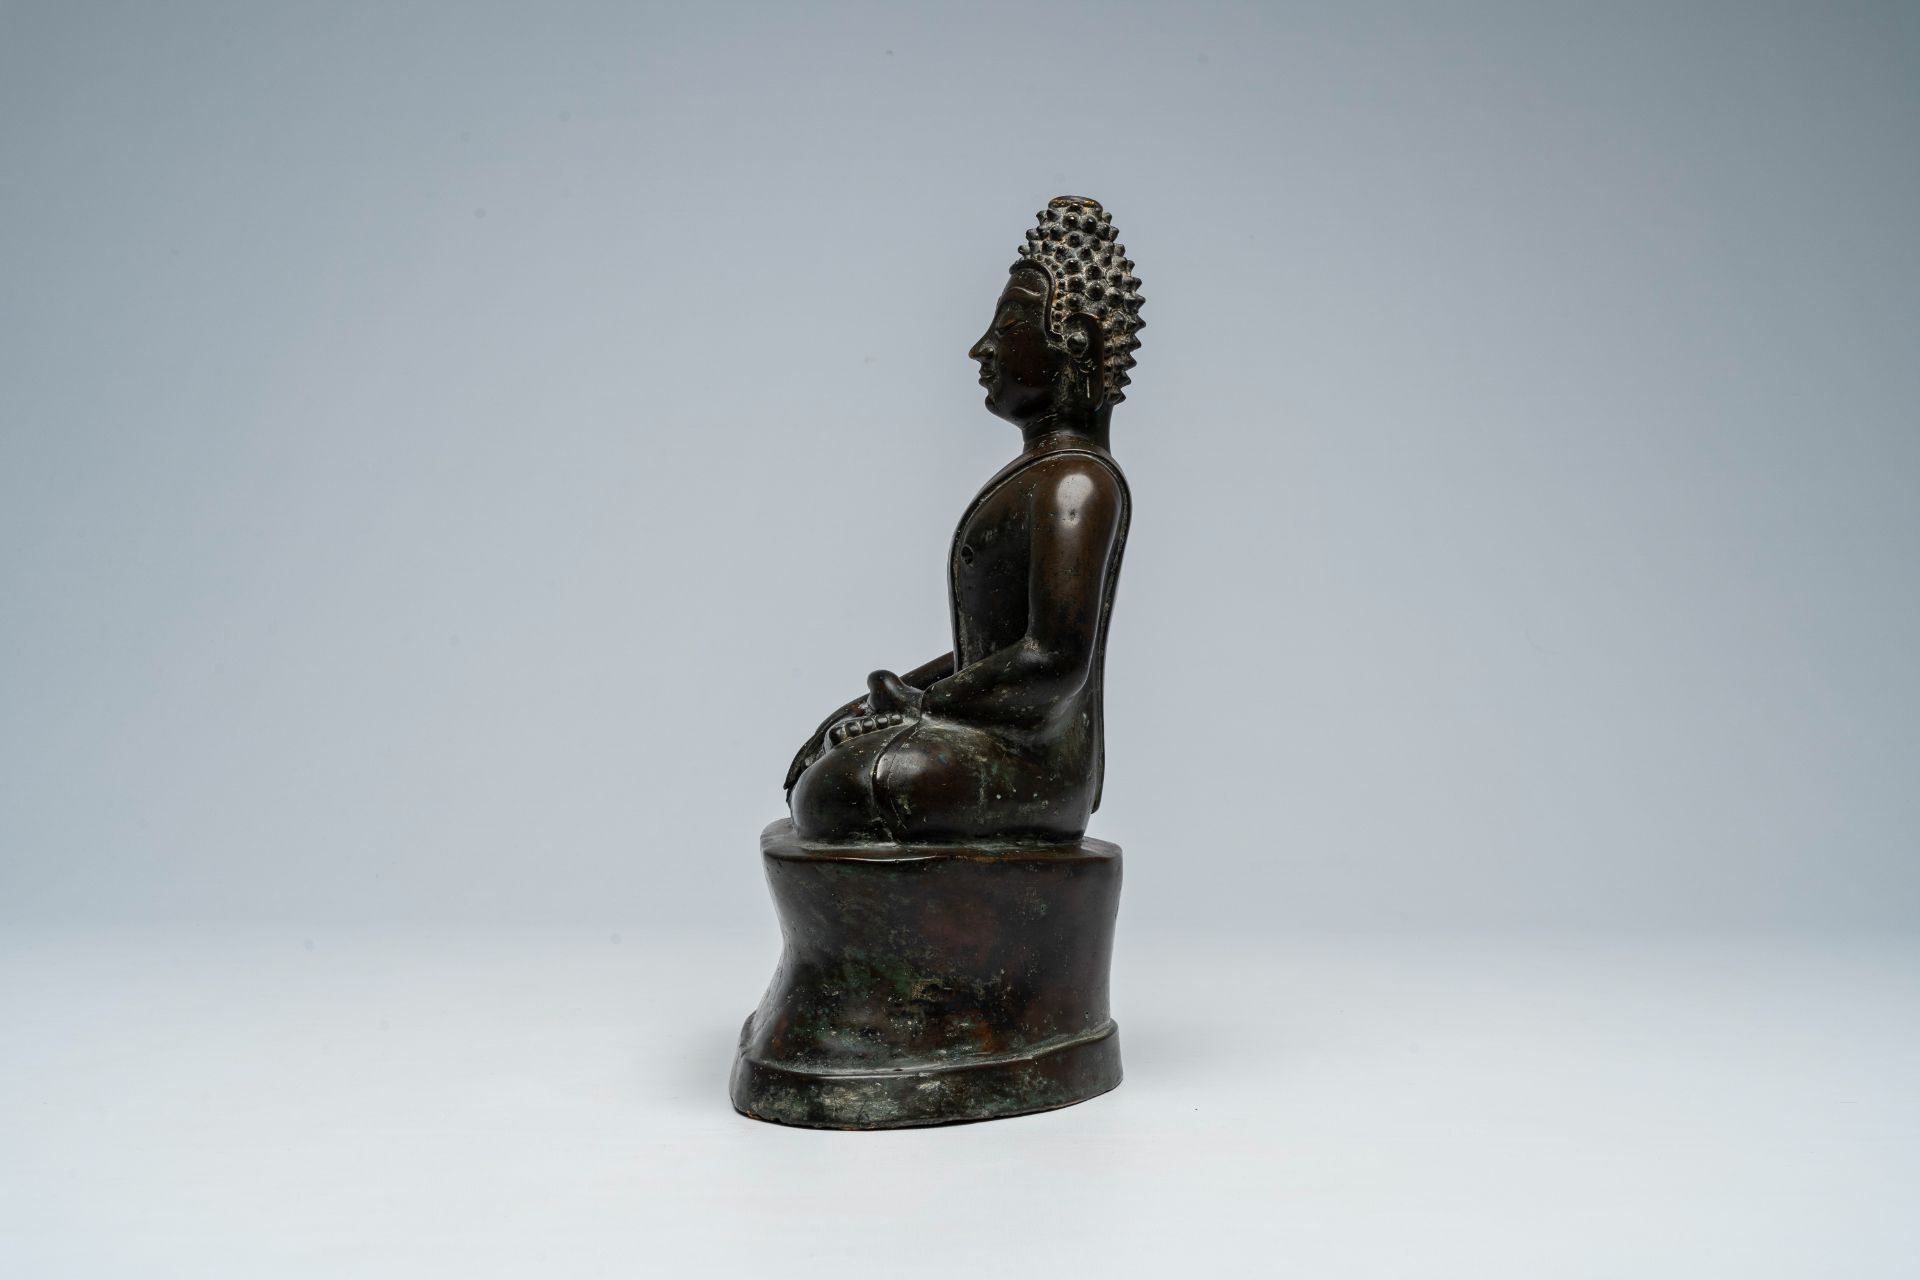 A Thai patinated bronze figure of a seated Buddha, possibly 16th C. - Image 3 of 7